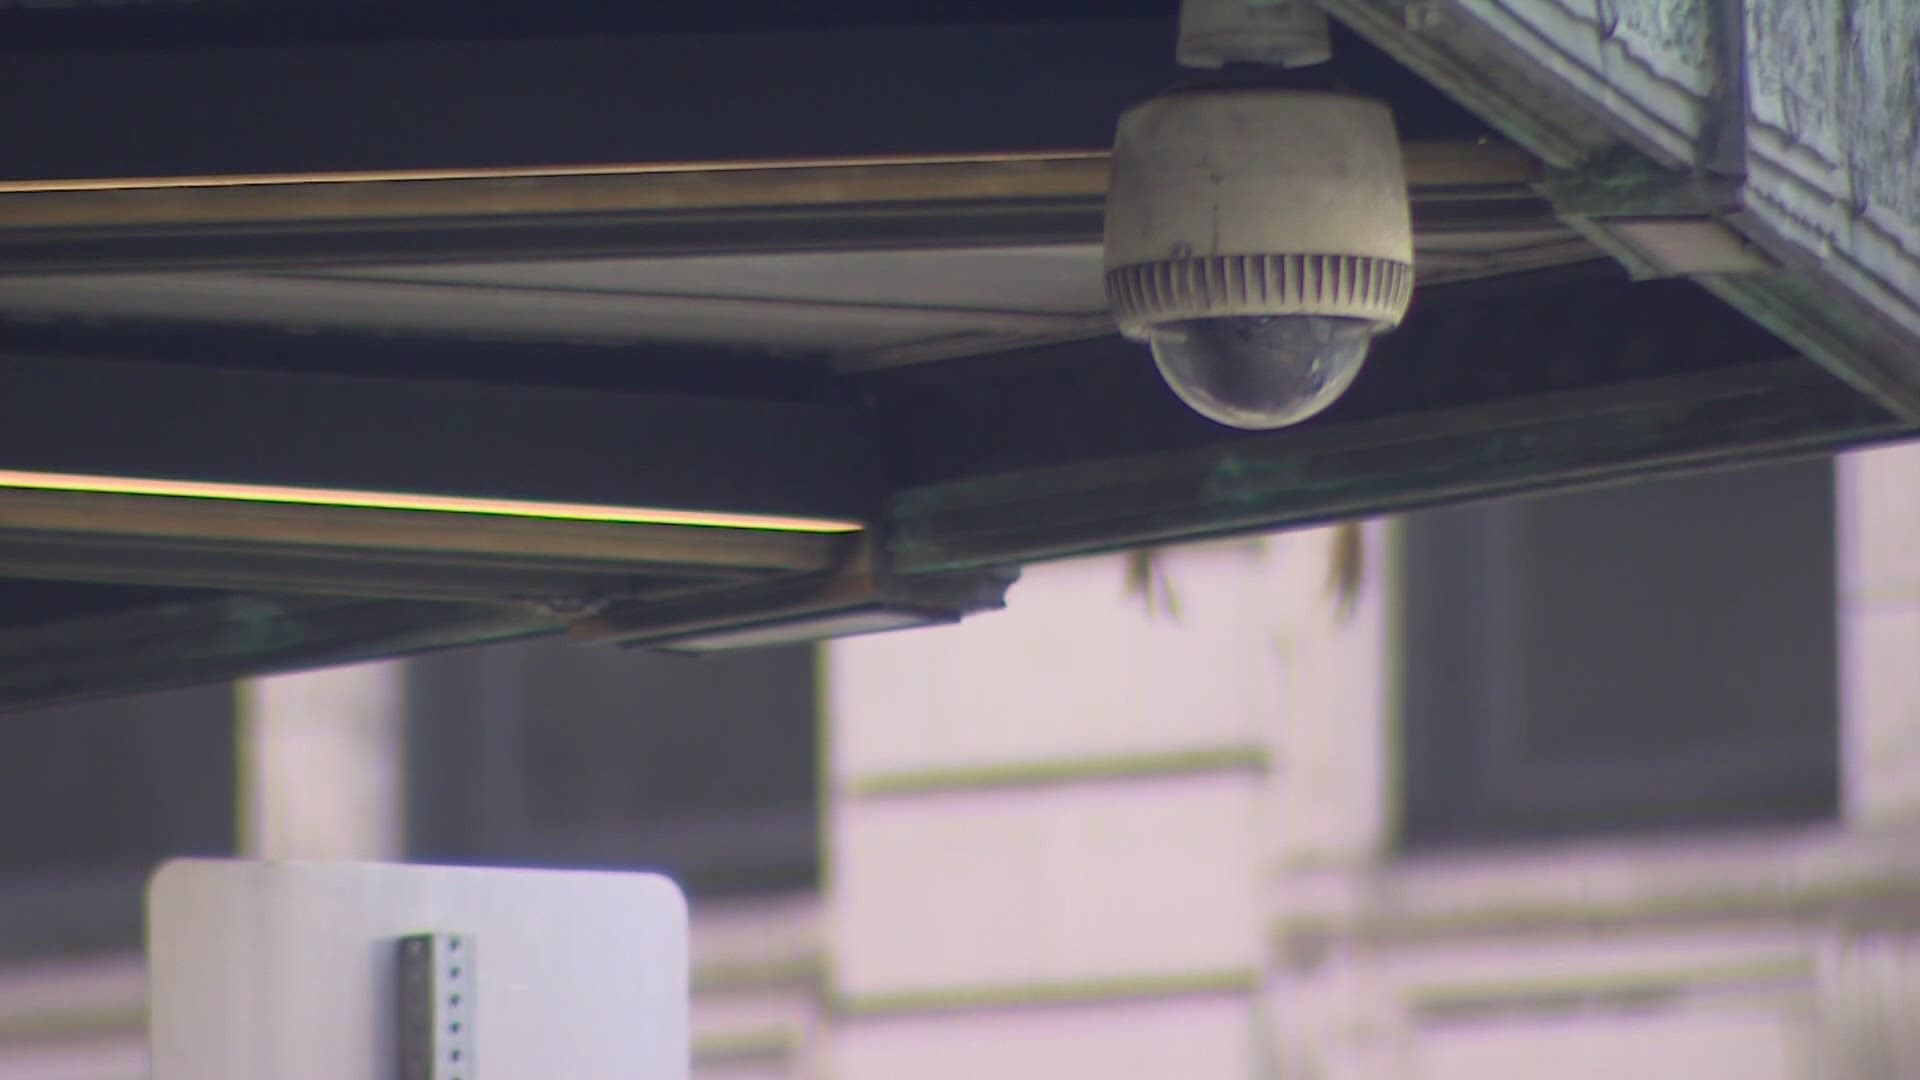 The King County Council voted to ban facial recognition technology June 1.